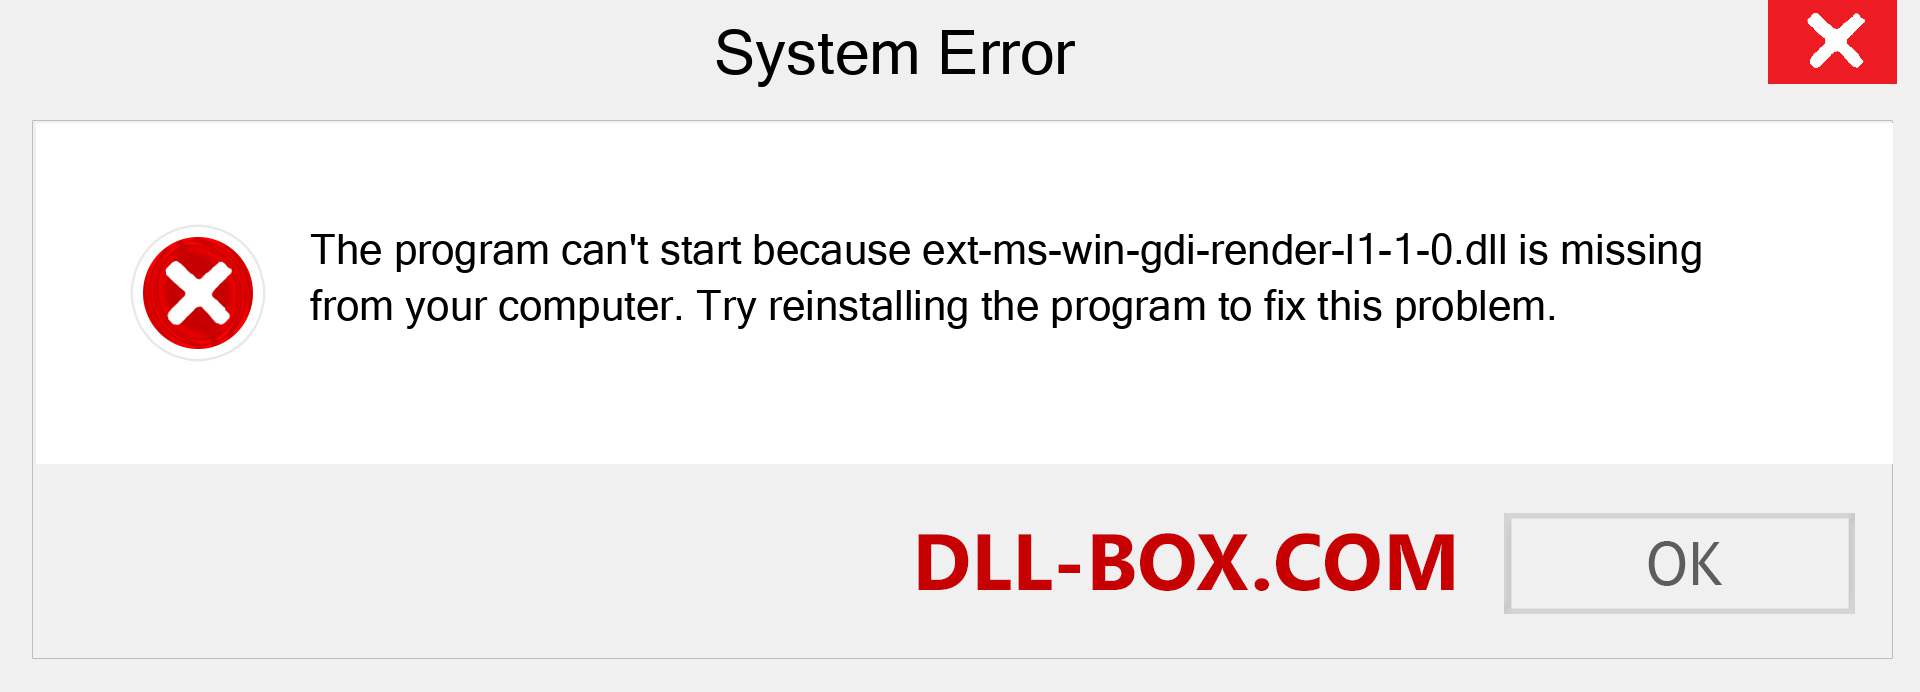  ext-ms-win-gdi-render-l1-1-0.dll file is missing?. Download for Windows 7, 8, 10 - Fix  ext-ms-win-gdi-render-l1-1-0 dll Missing Error on Windows, photos, images